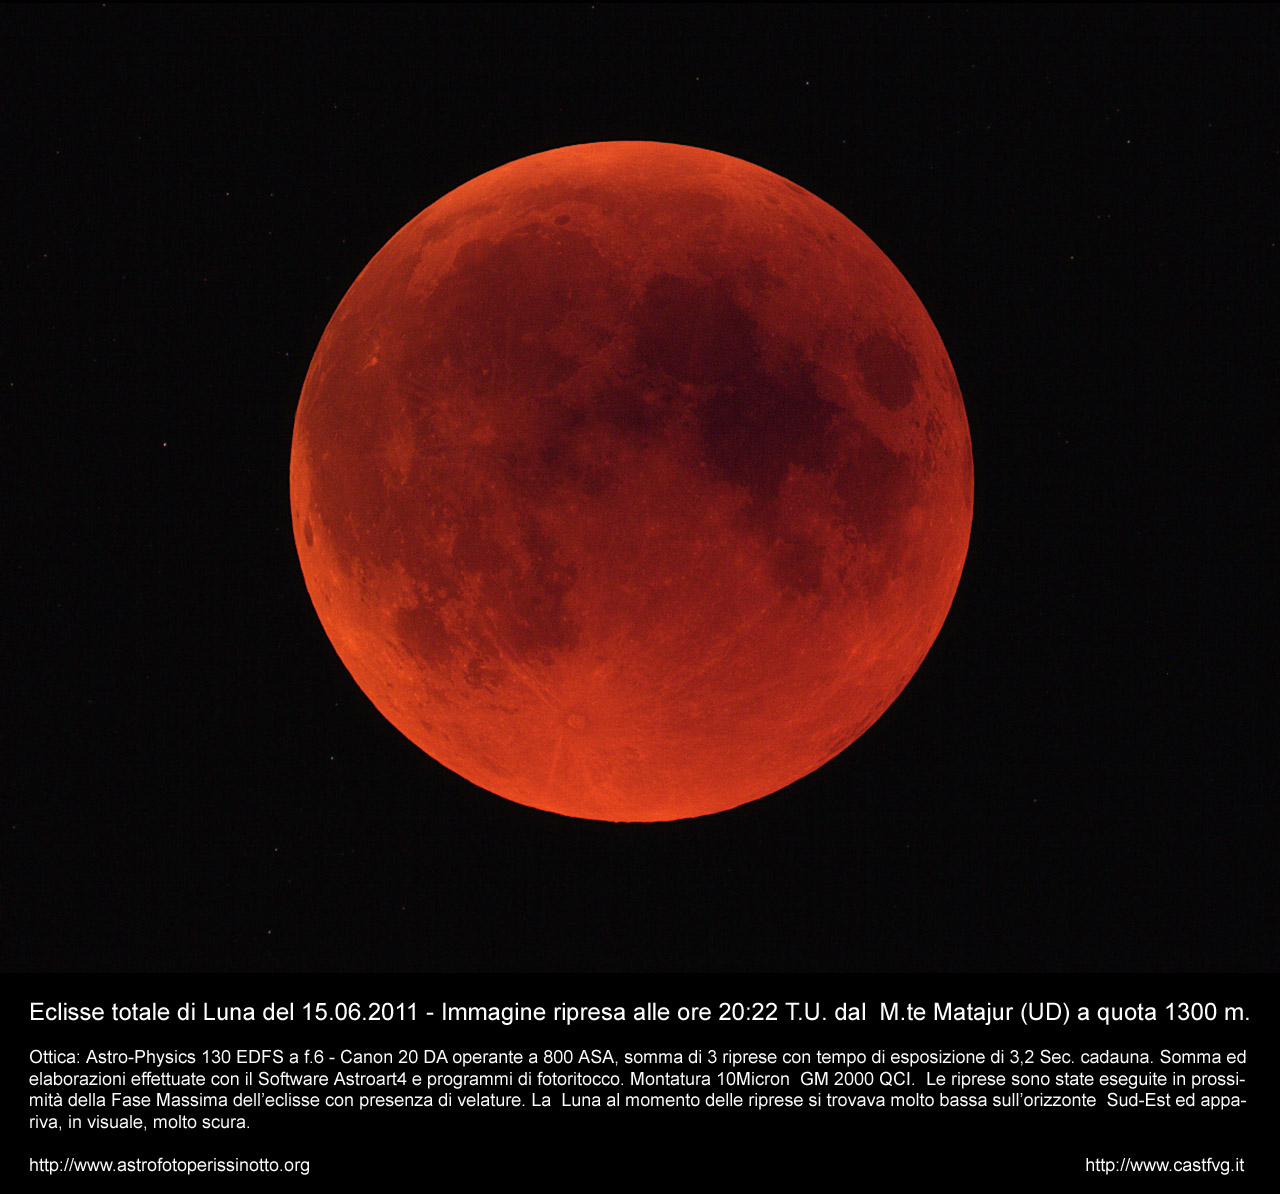 Total Moon eclipse photographed from Mount Matajur by Enrico Perissinotto: 256 KB